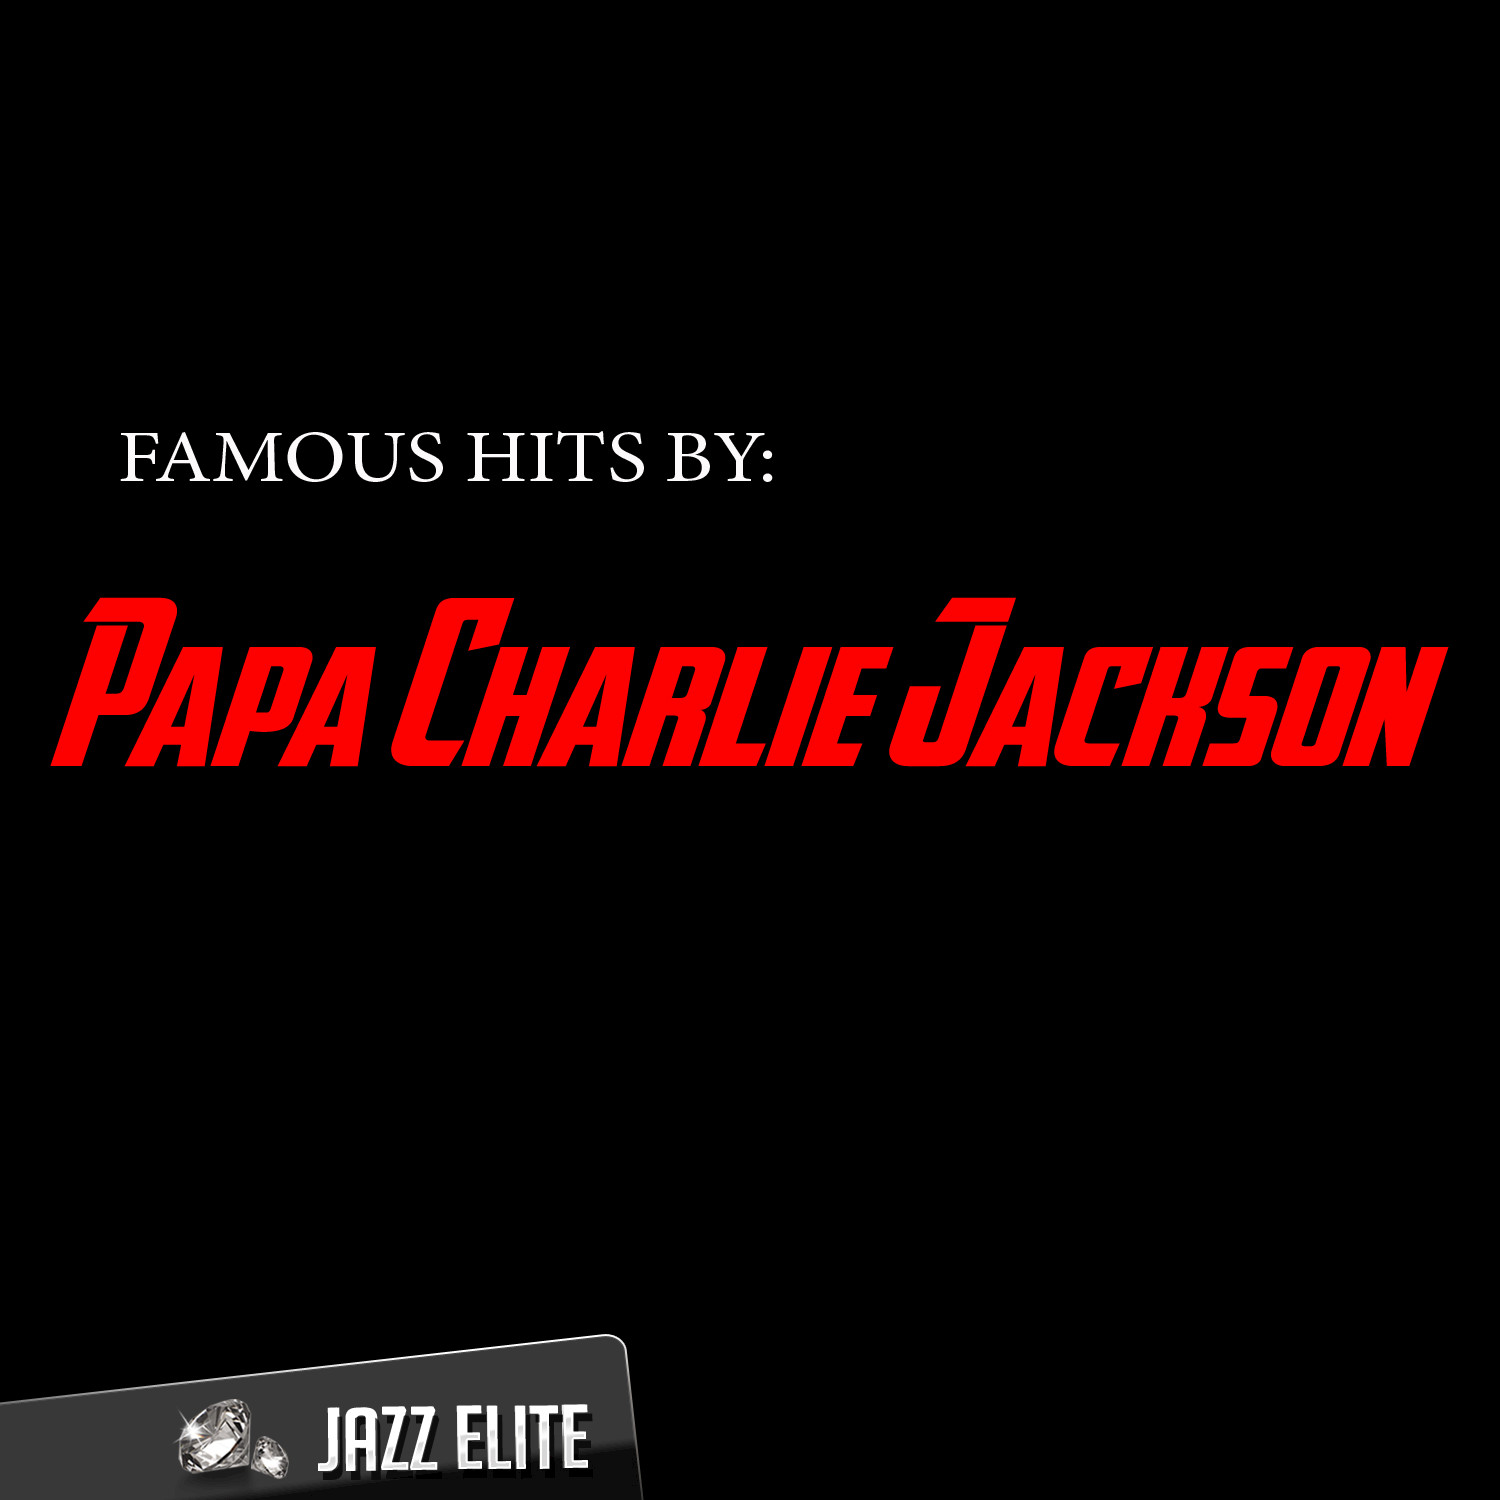 Famous Hits by Papa Charlie Jackson